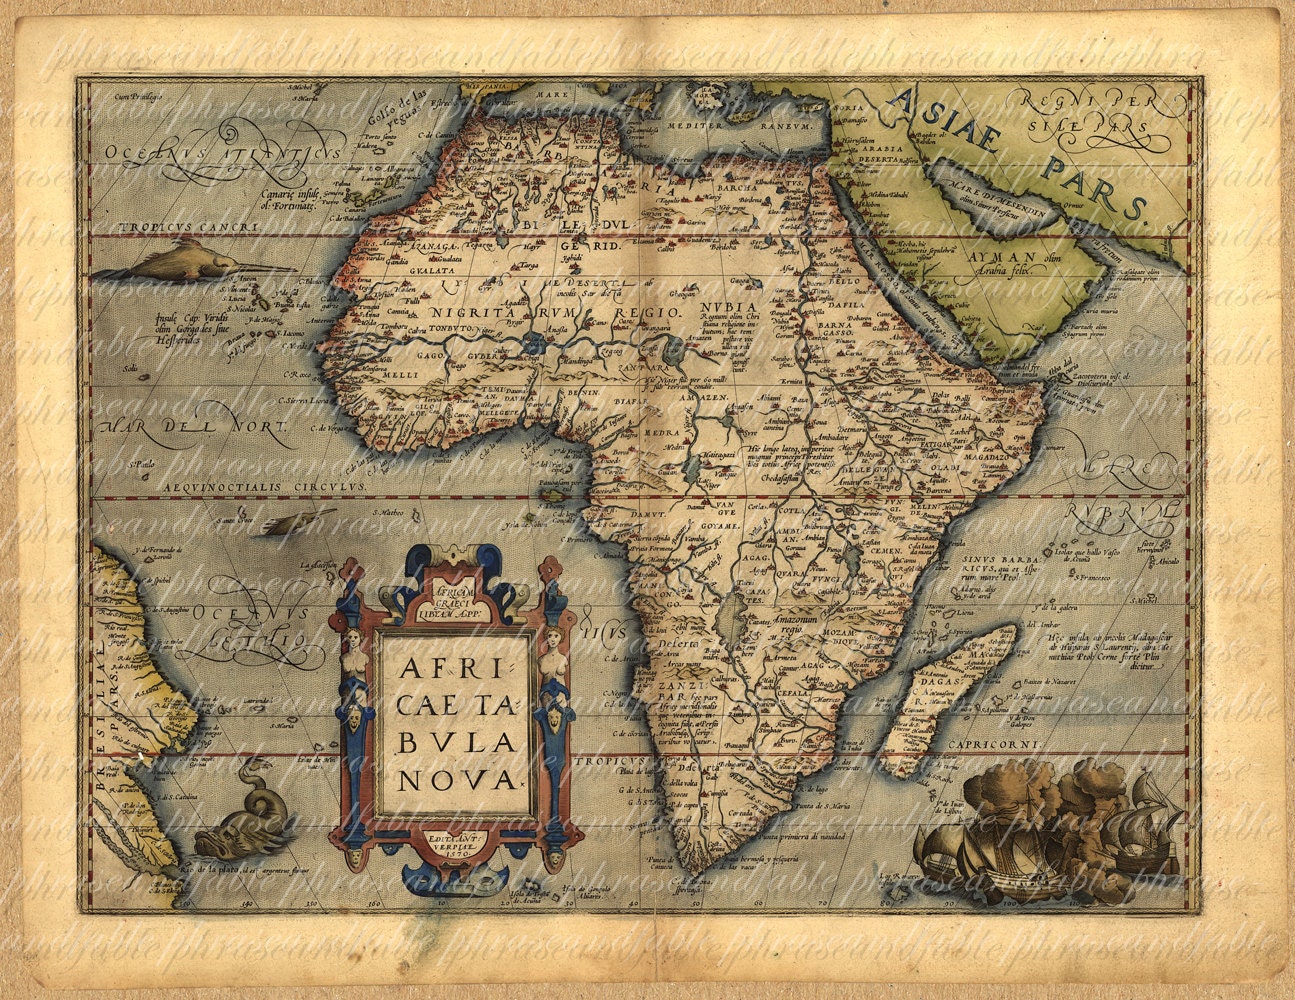 Map Of Africa From The 1500s 034 Ancient Old World Cartography Exploring Safari Sailing Vintage Digital Image Download - phraseandfable